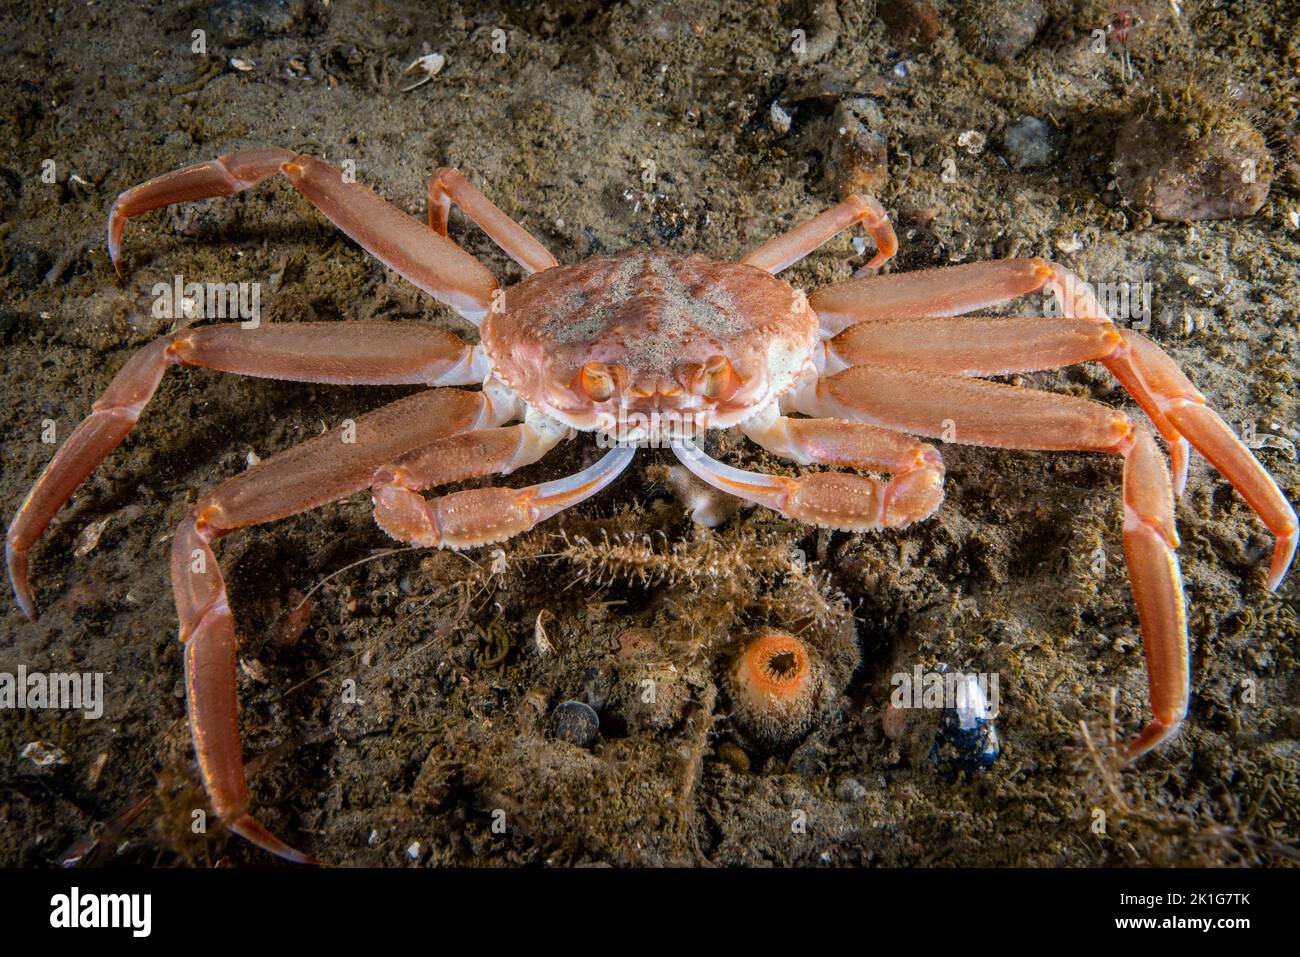 Snow Crab underwater in the St. Lawrence River in canada Stock Photo